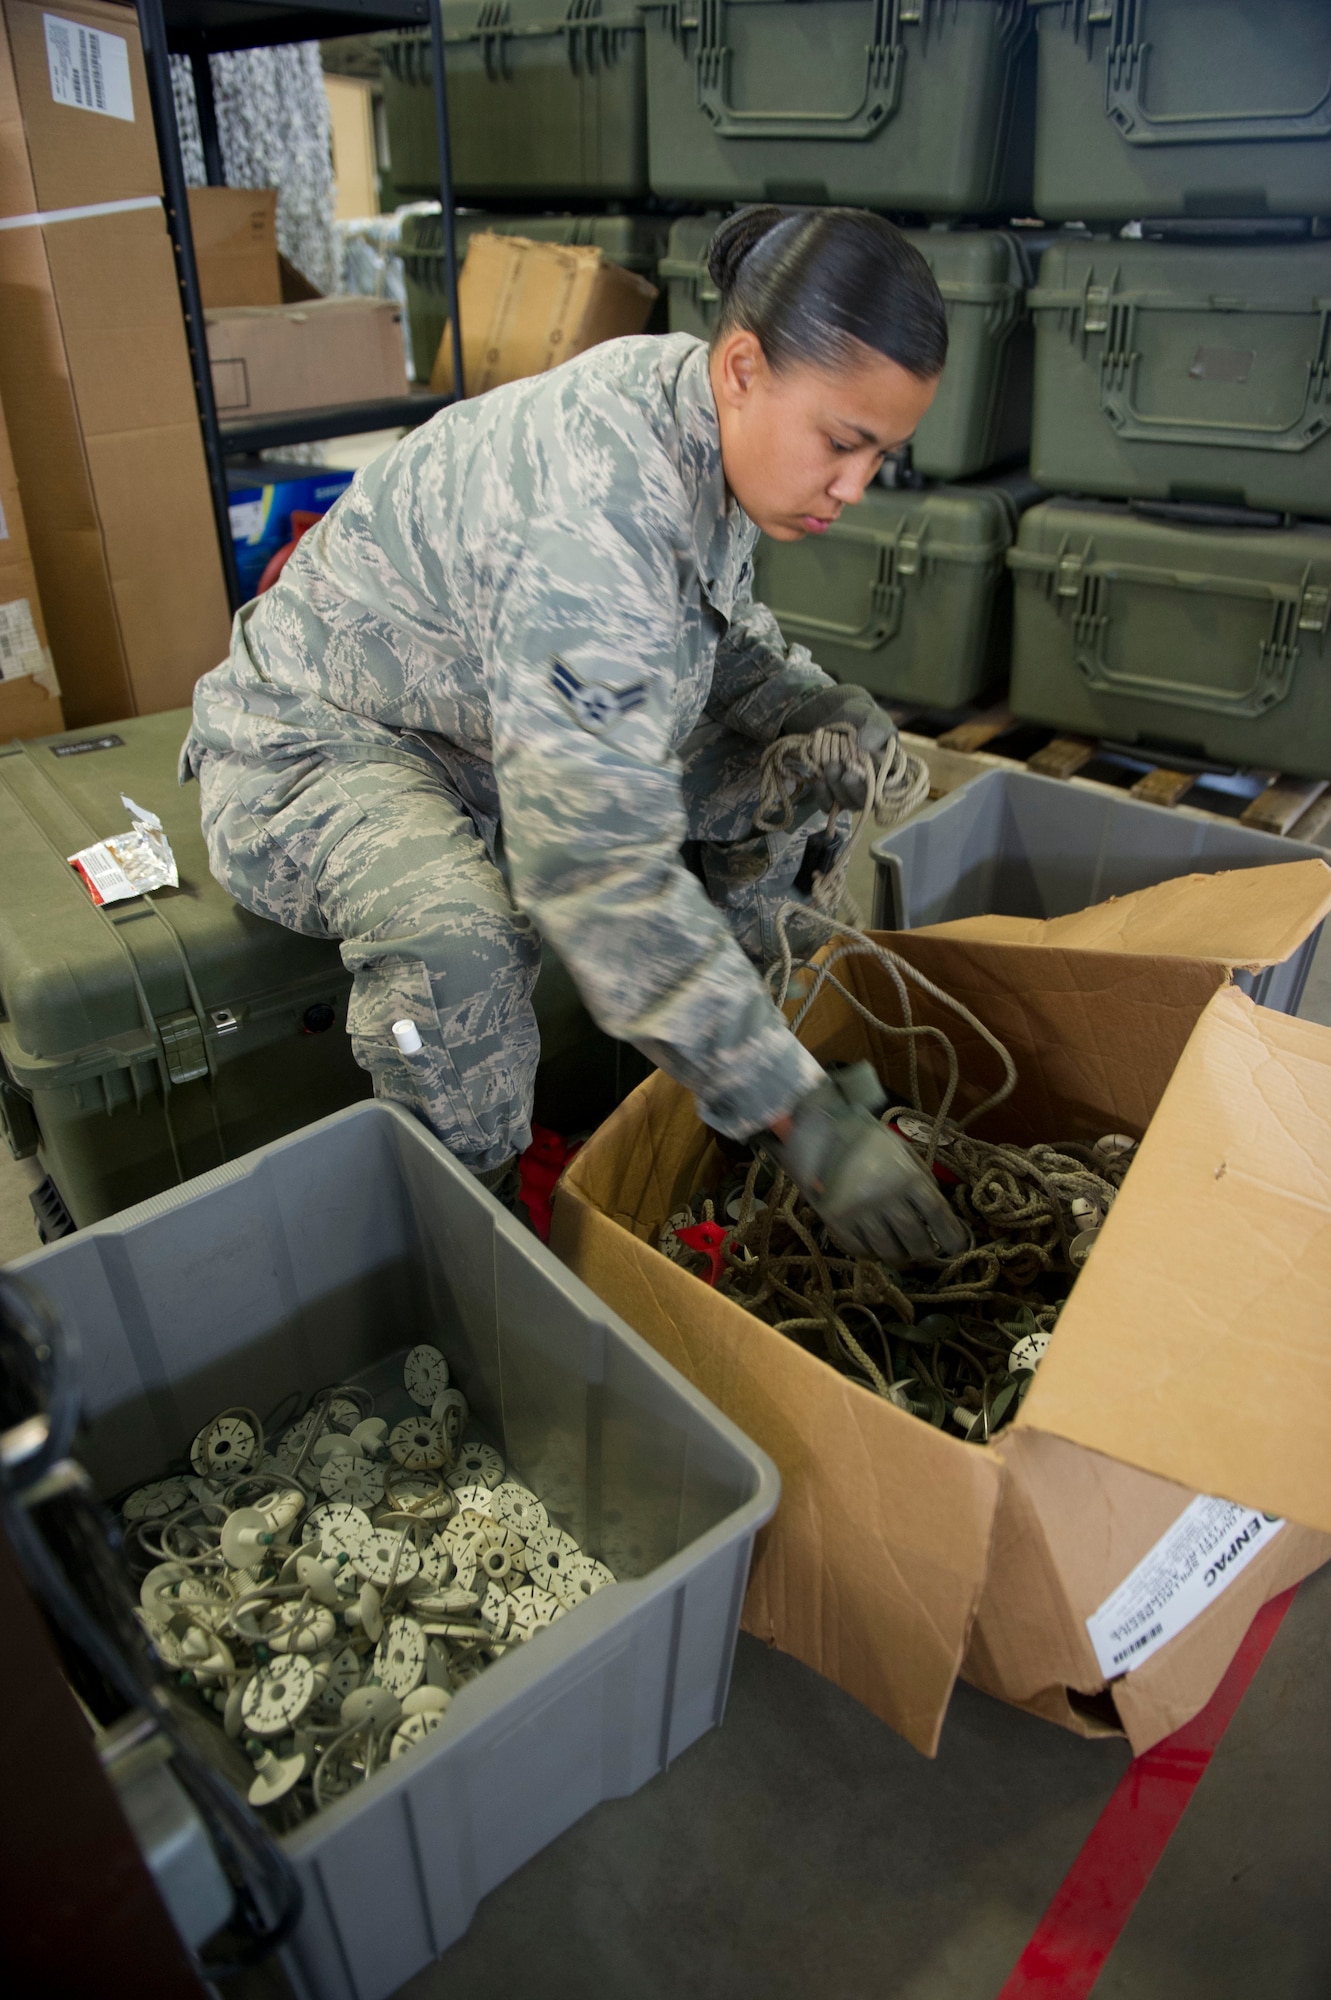 JOINT BASE MCGUIRE-DIX-LAKEHURST, N.J. - Airman 1st Class Ayisha Jones, 819th Global Support Squadron, sorts out equipment to help clean out the Global Reach Deployment Center, here, Aug. 7, 2013. (U.S. Air Force photo by Staff Sgt. Gustavo Gonzalez)